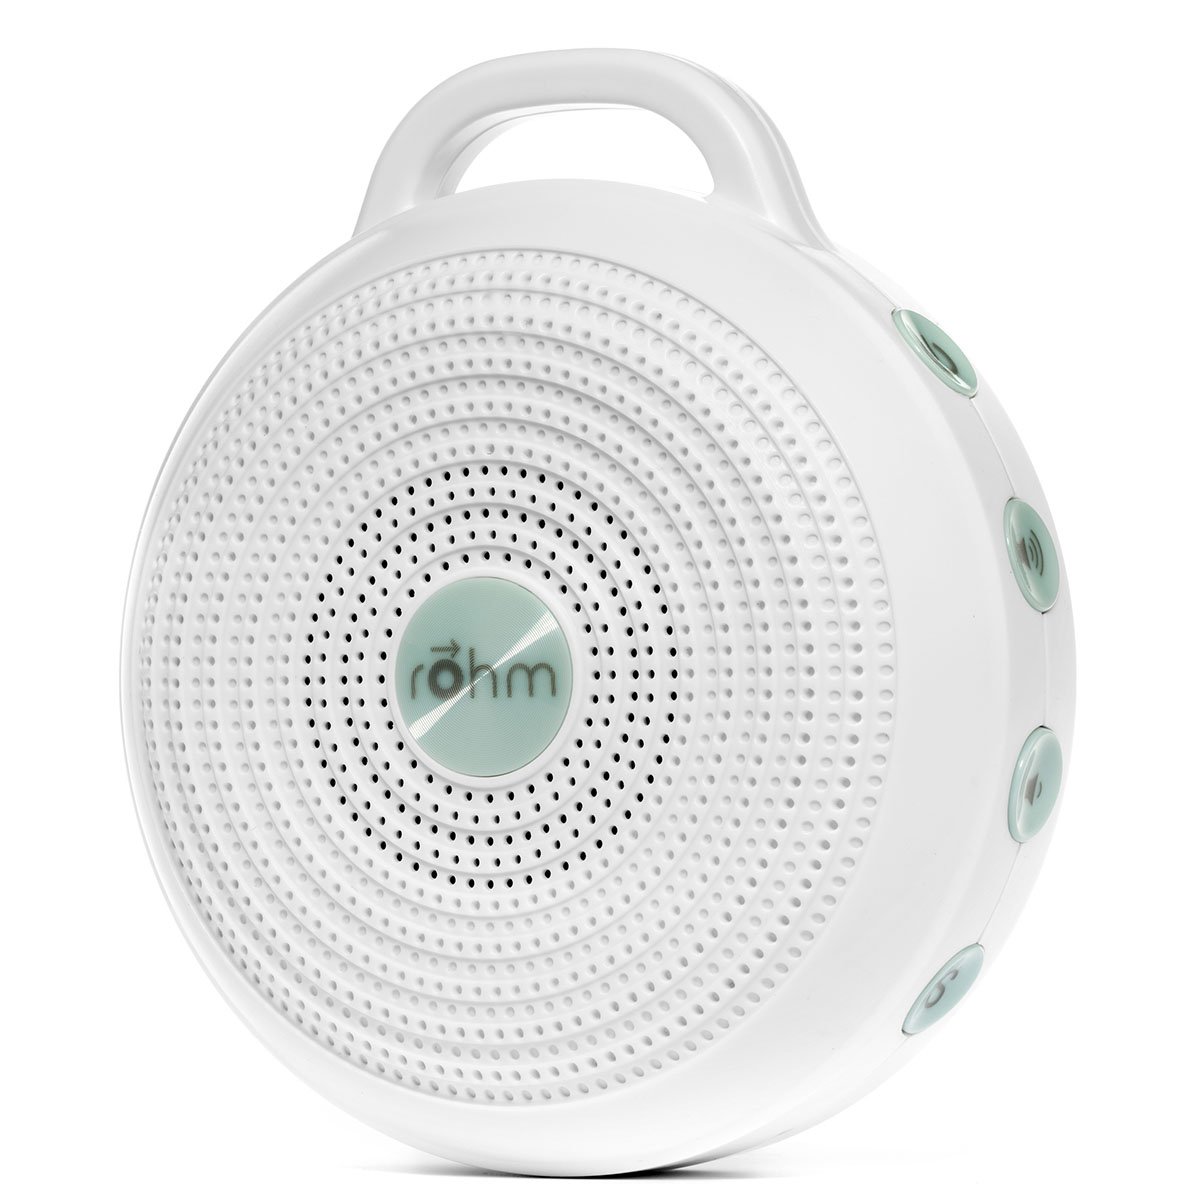 Quirks Marketing Philippines - Marpac Rohm Portable White Noise Sound Machine for Adults